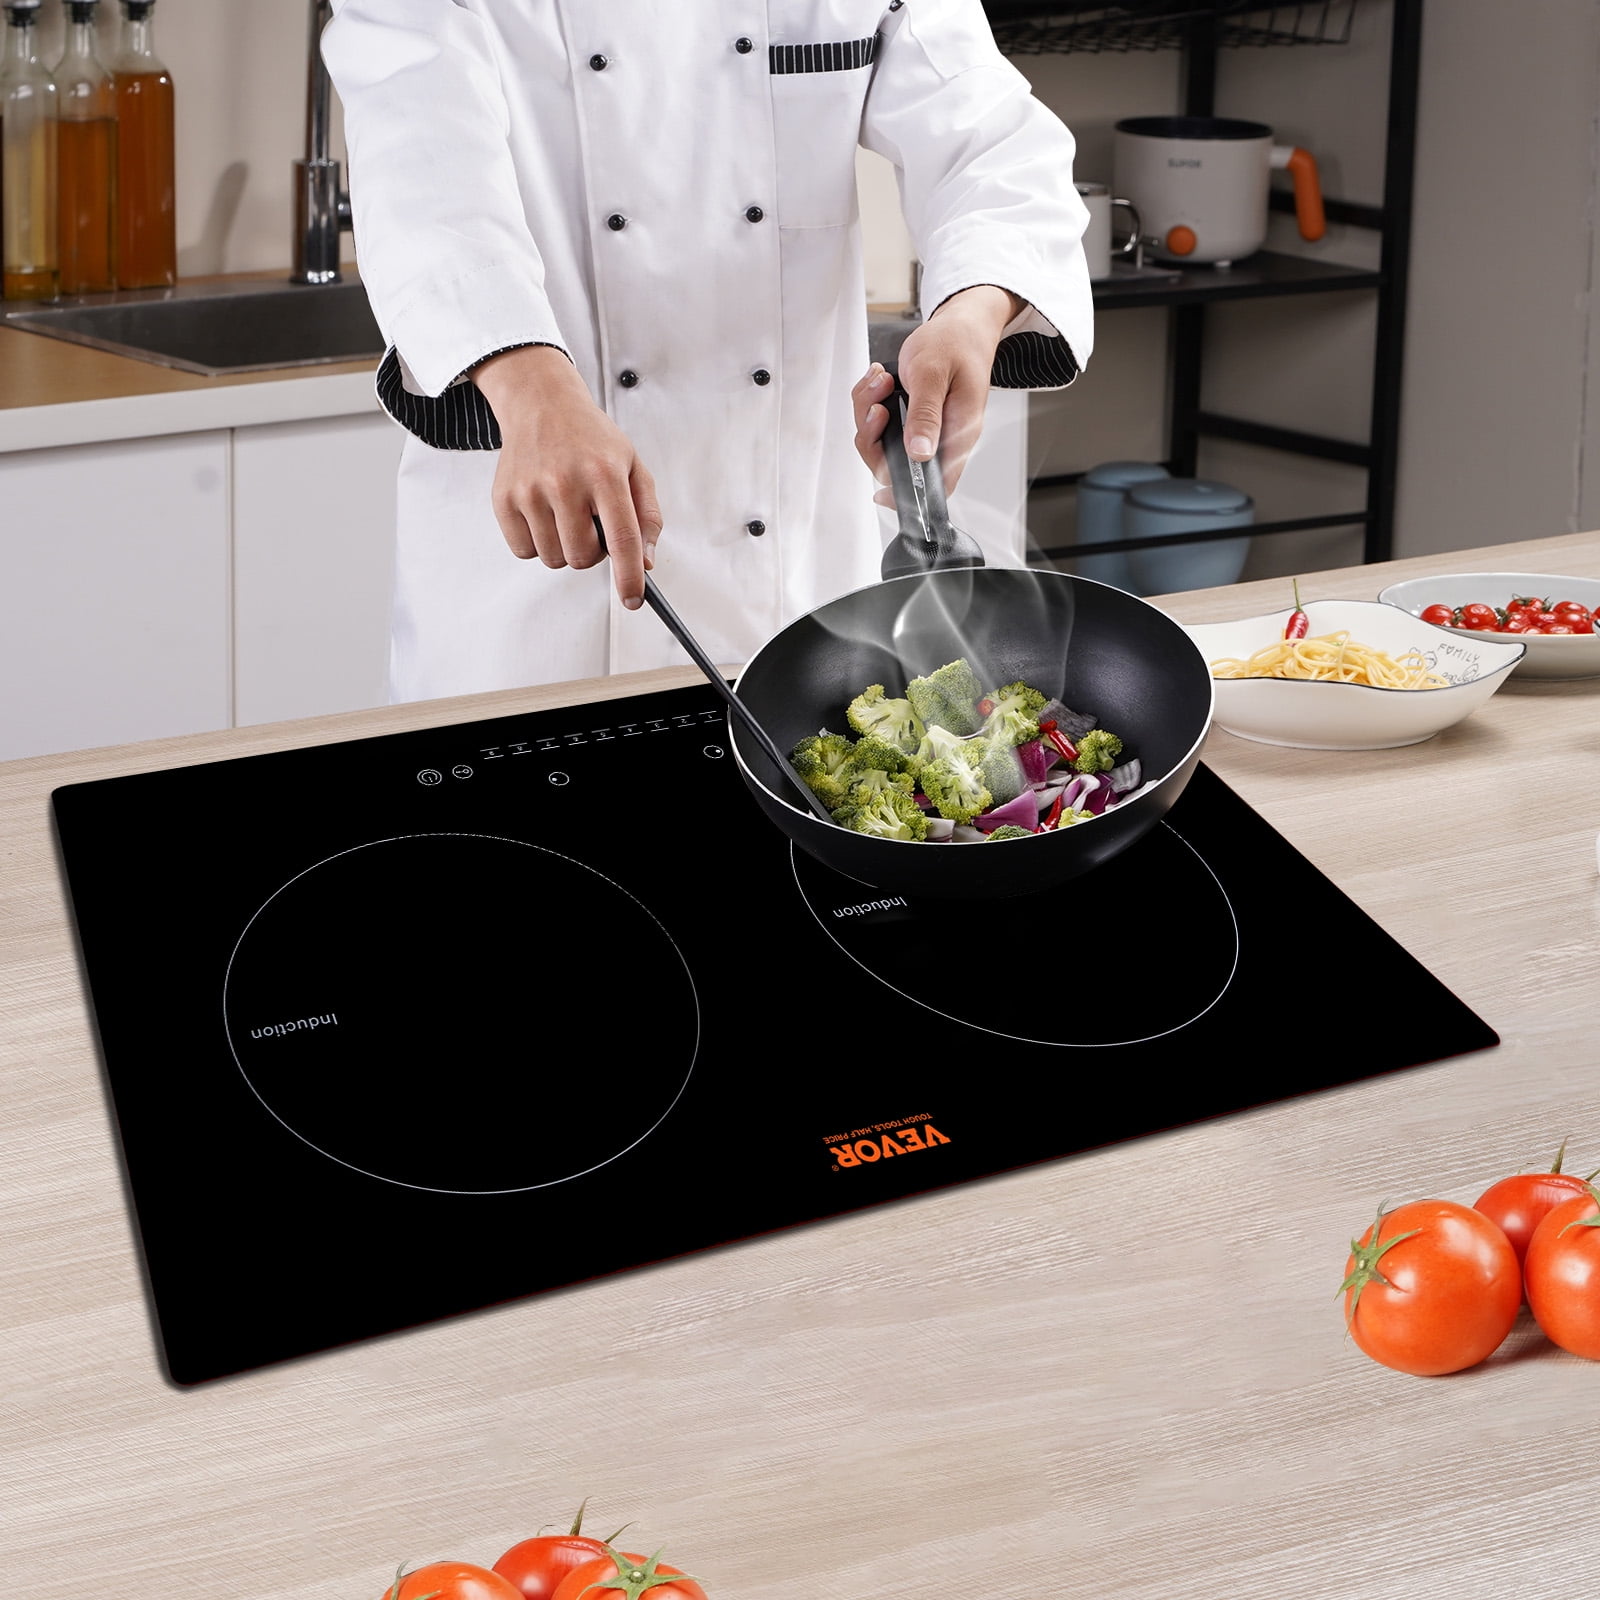  VBGK Double Induction Cooktop,4000W 110V Induction stove top  Knob Control, Portable Iduction Cooktop with 9 Power Levels, Child Safety  Lock & Timer 2 burner Induction cooktop: Home & Kitchen